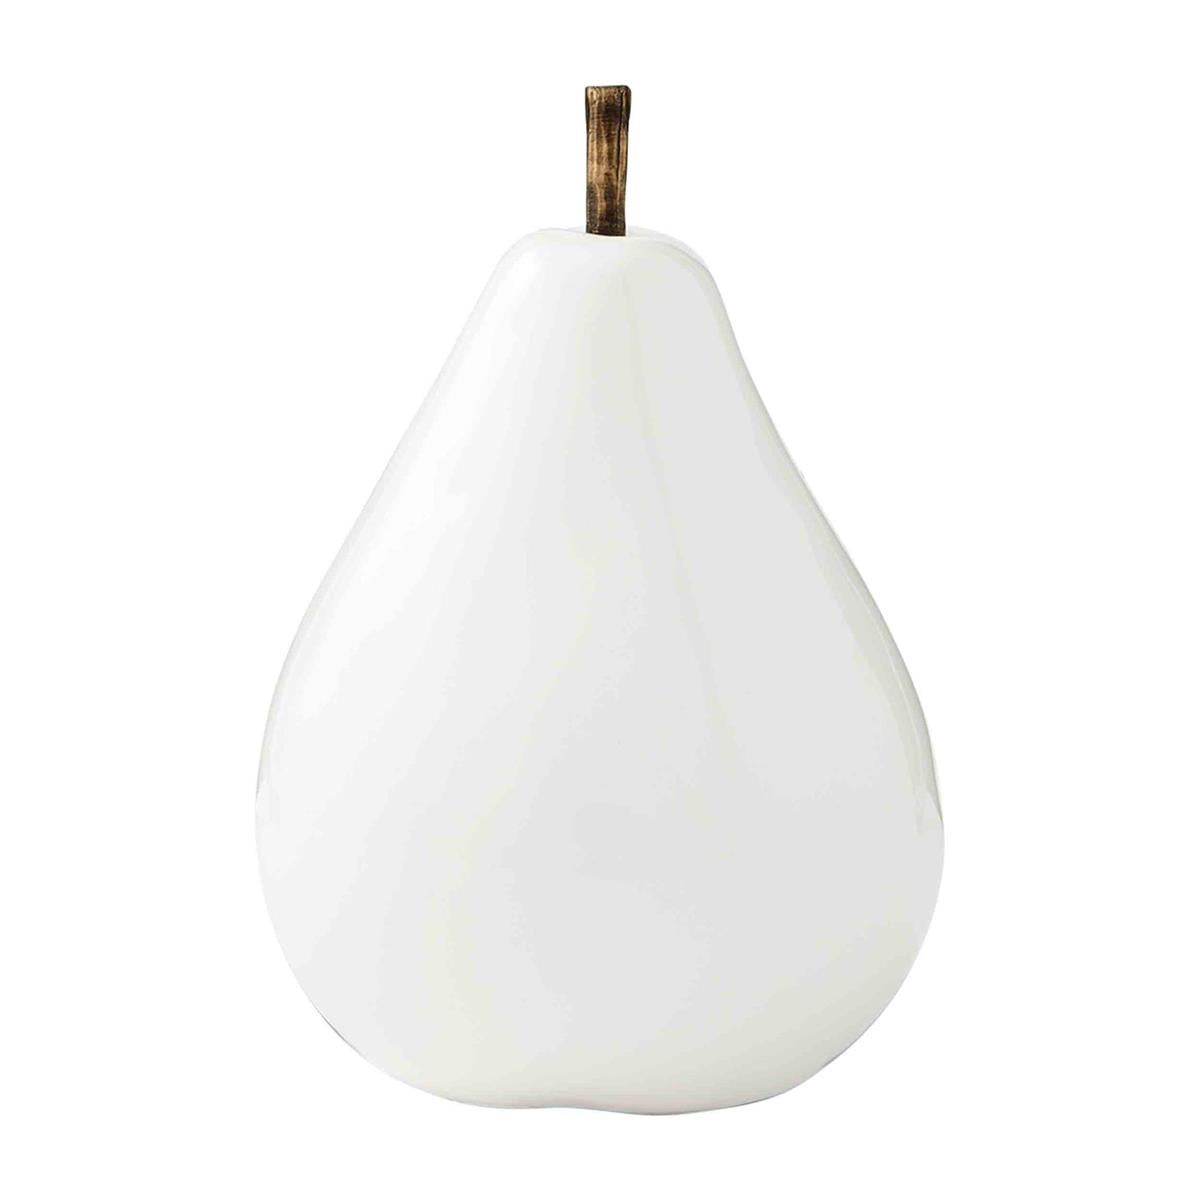 small white ceramic pear sitter on a white background